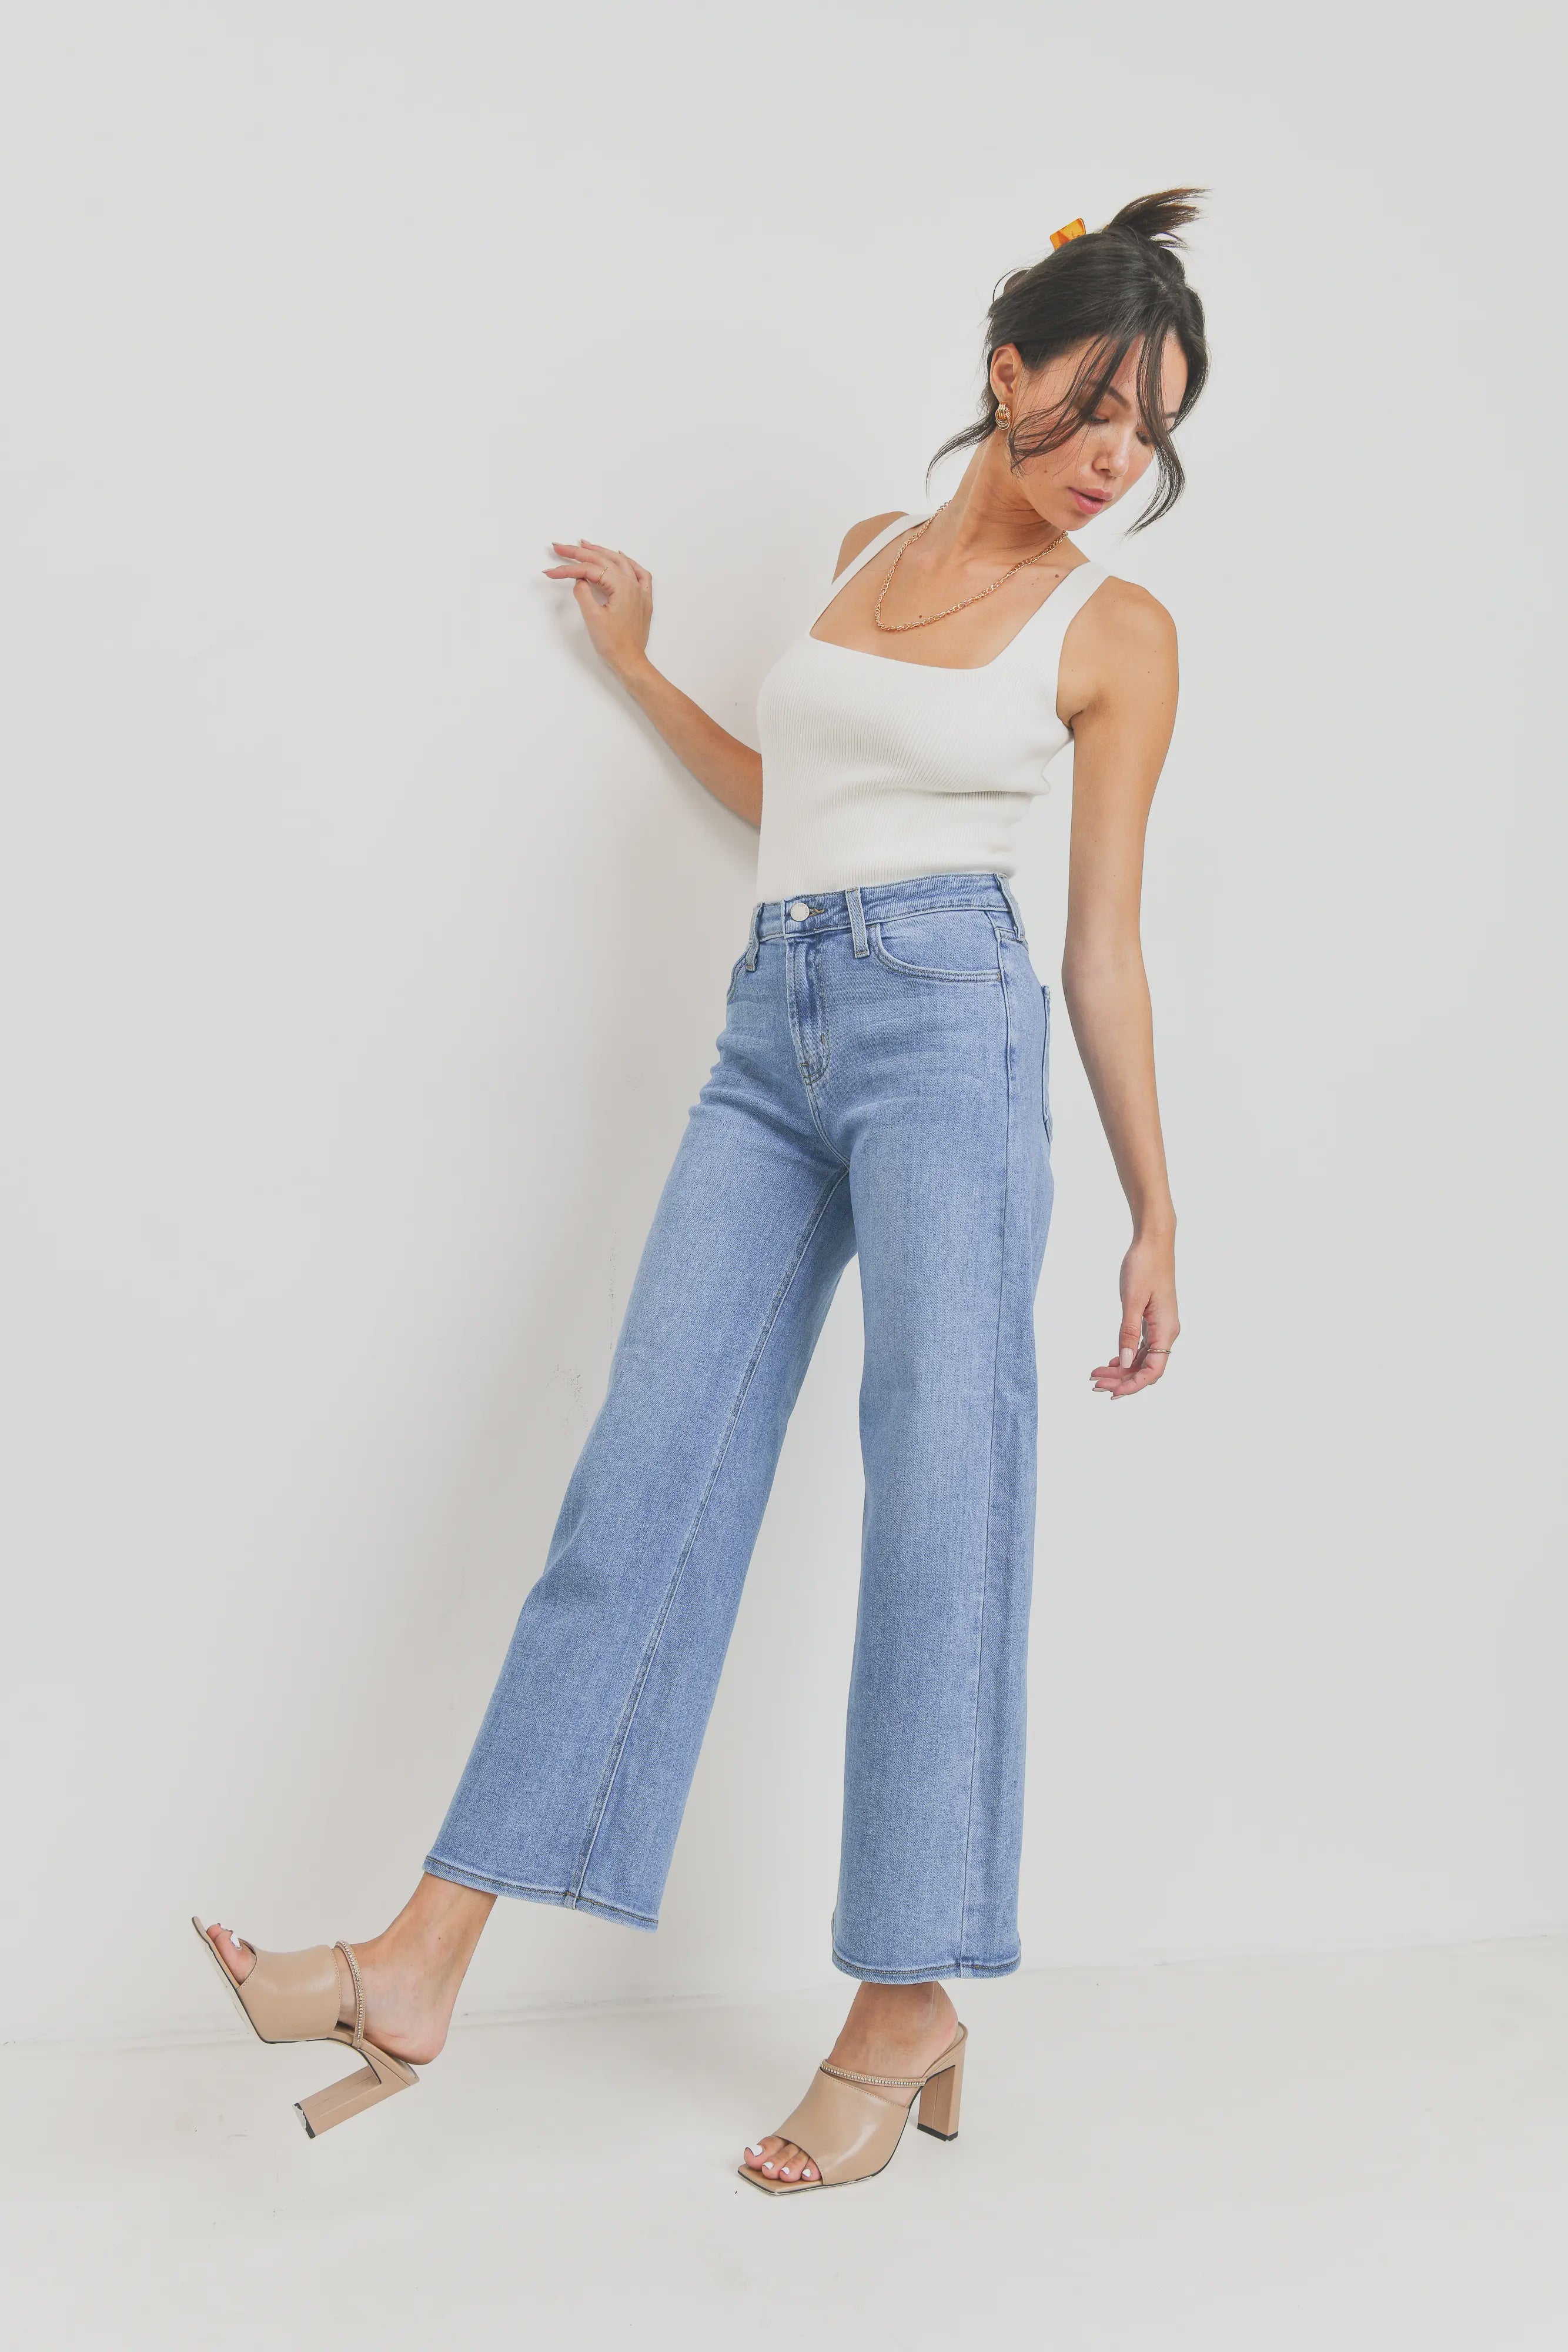 The Classic Wide Leg Jeans by Just Black Denim